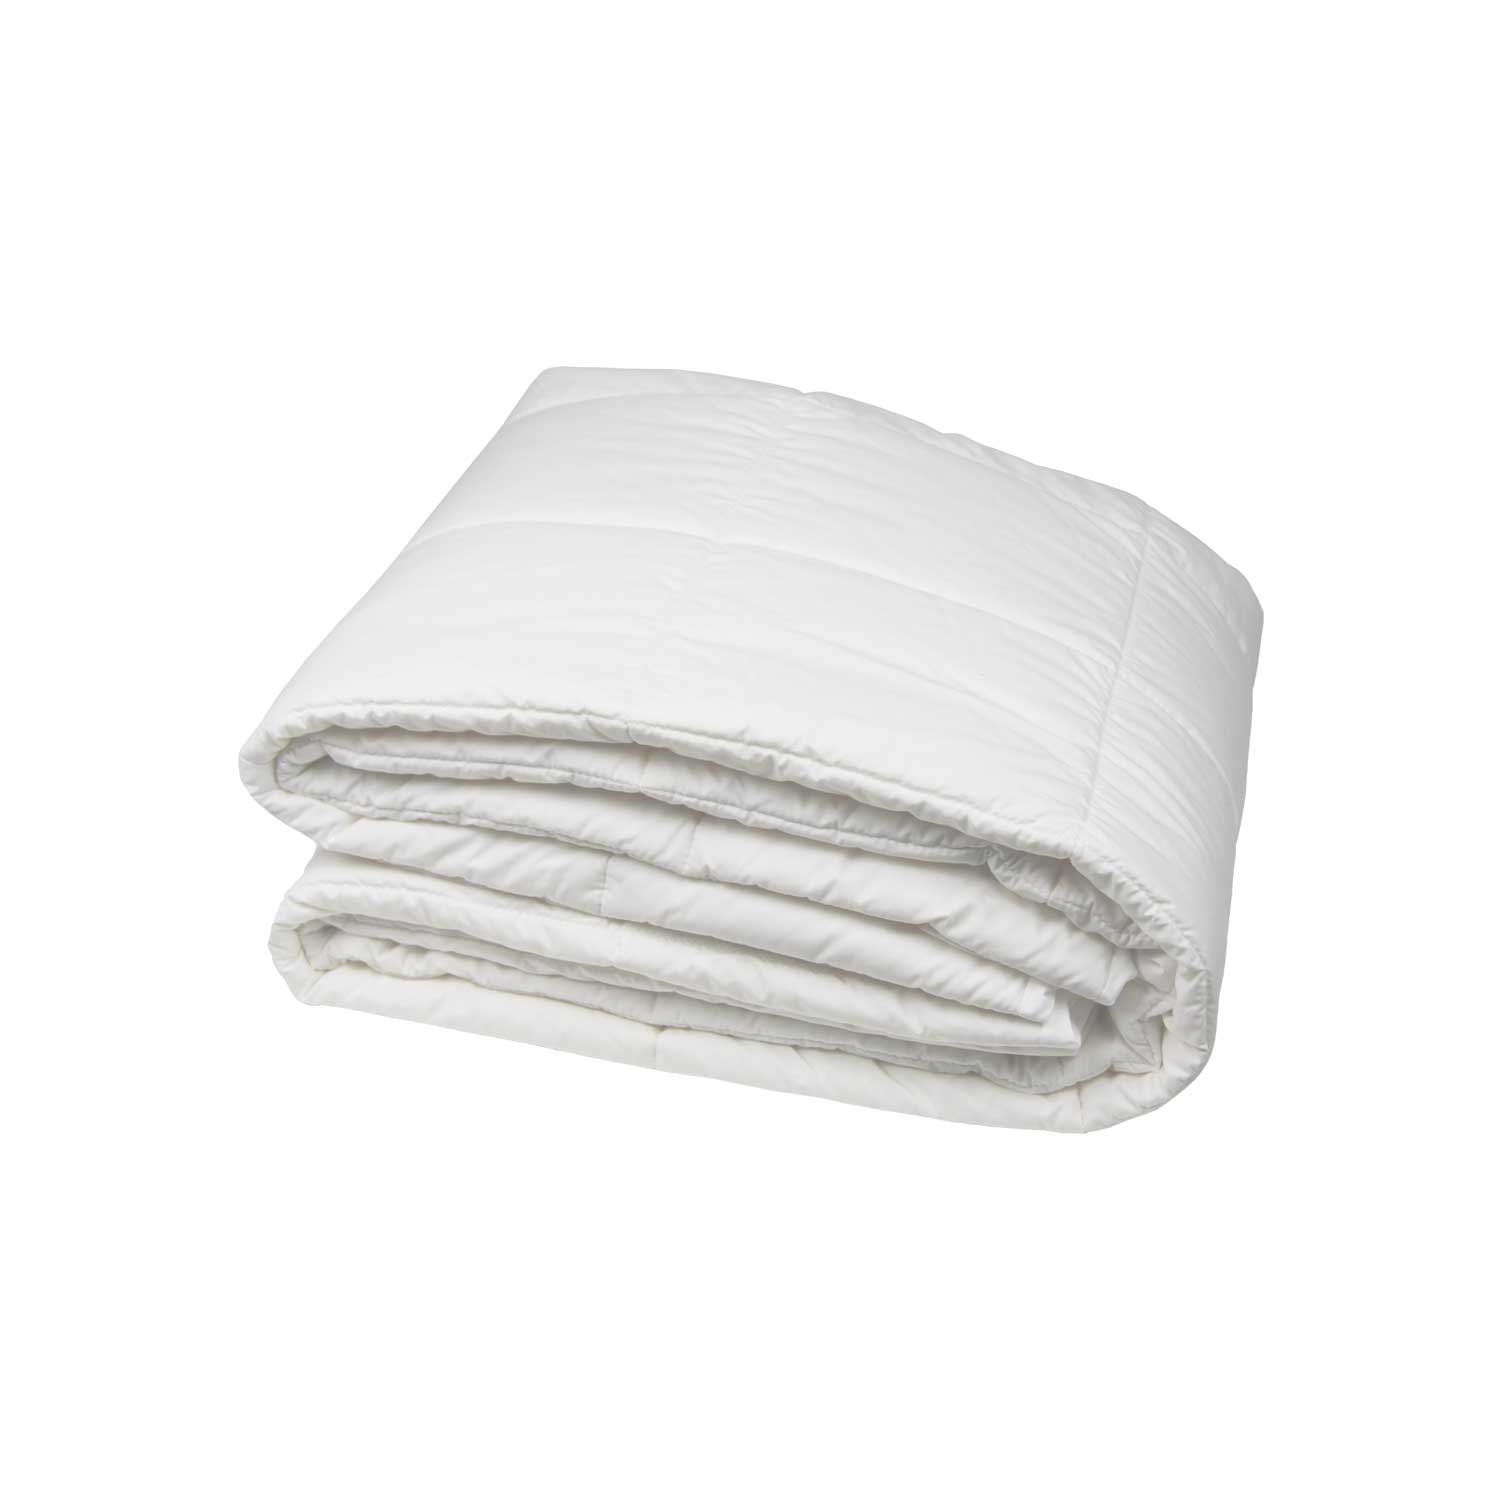 quilted wool mattress protector on its side